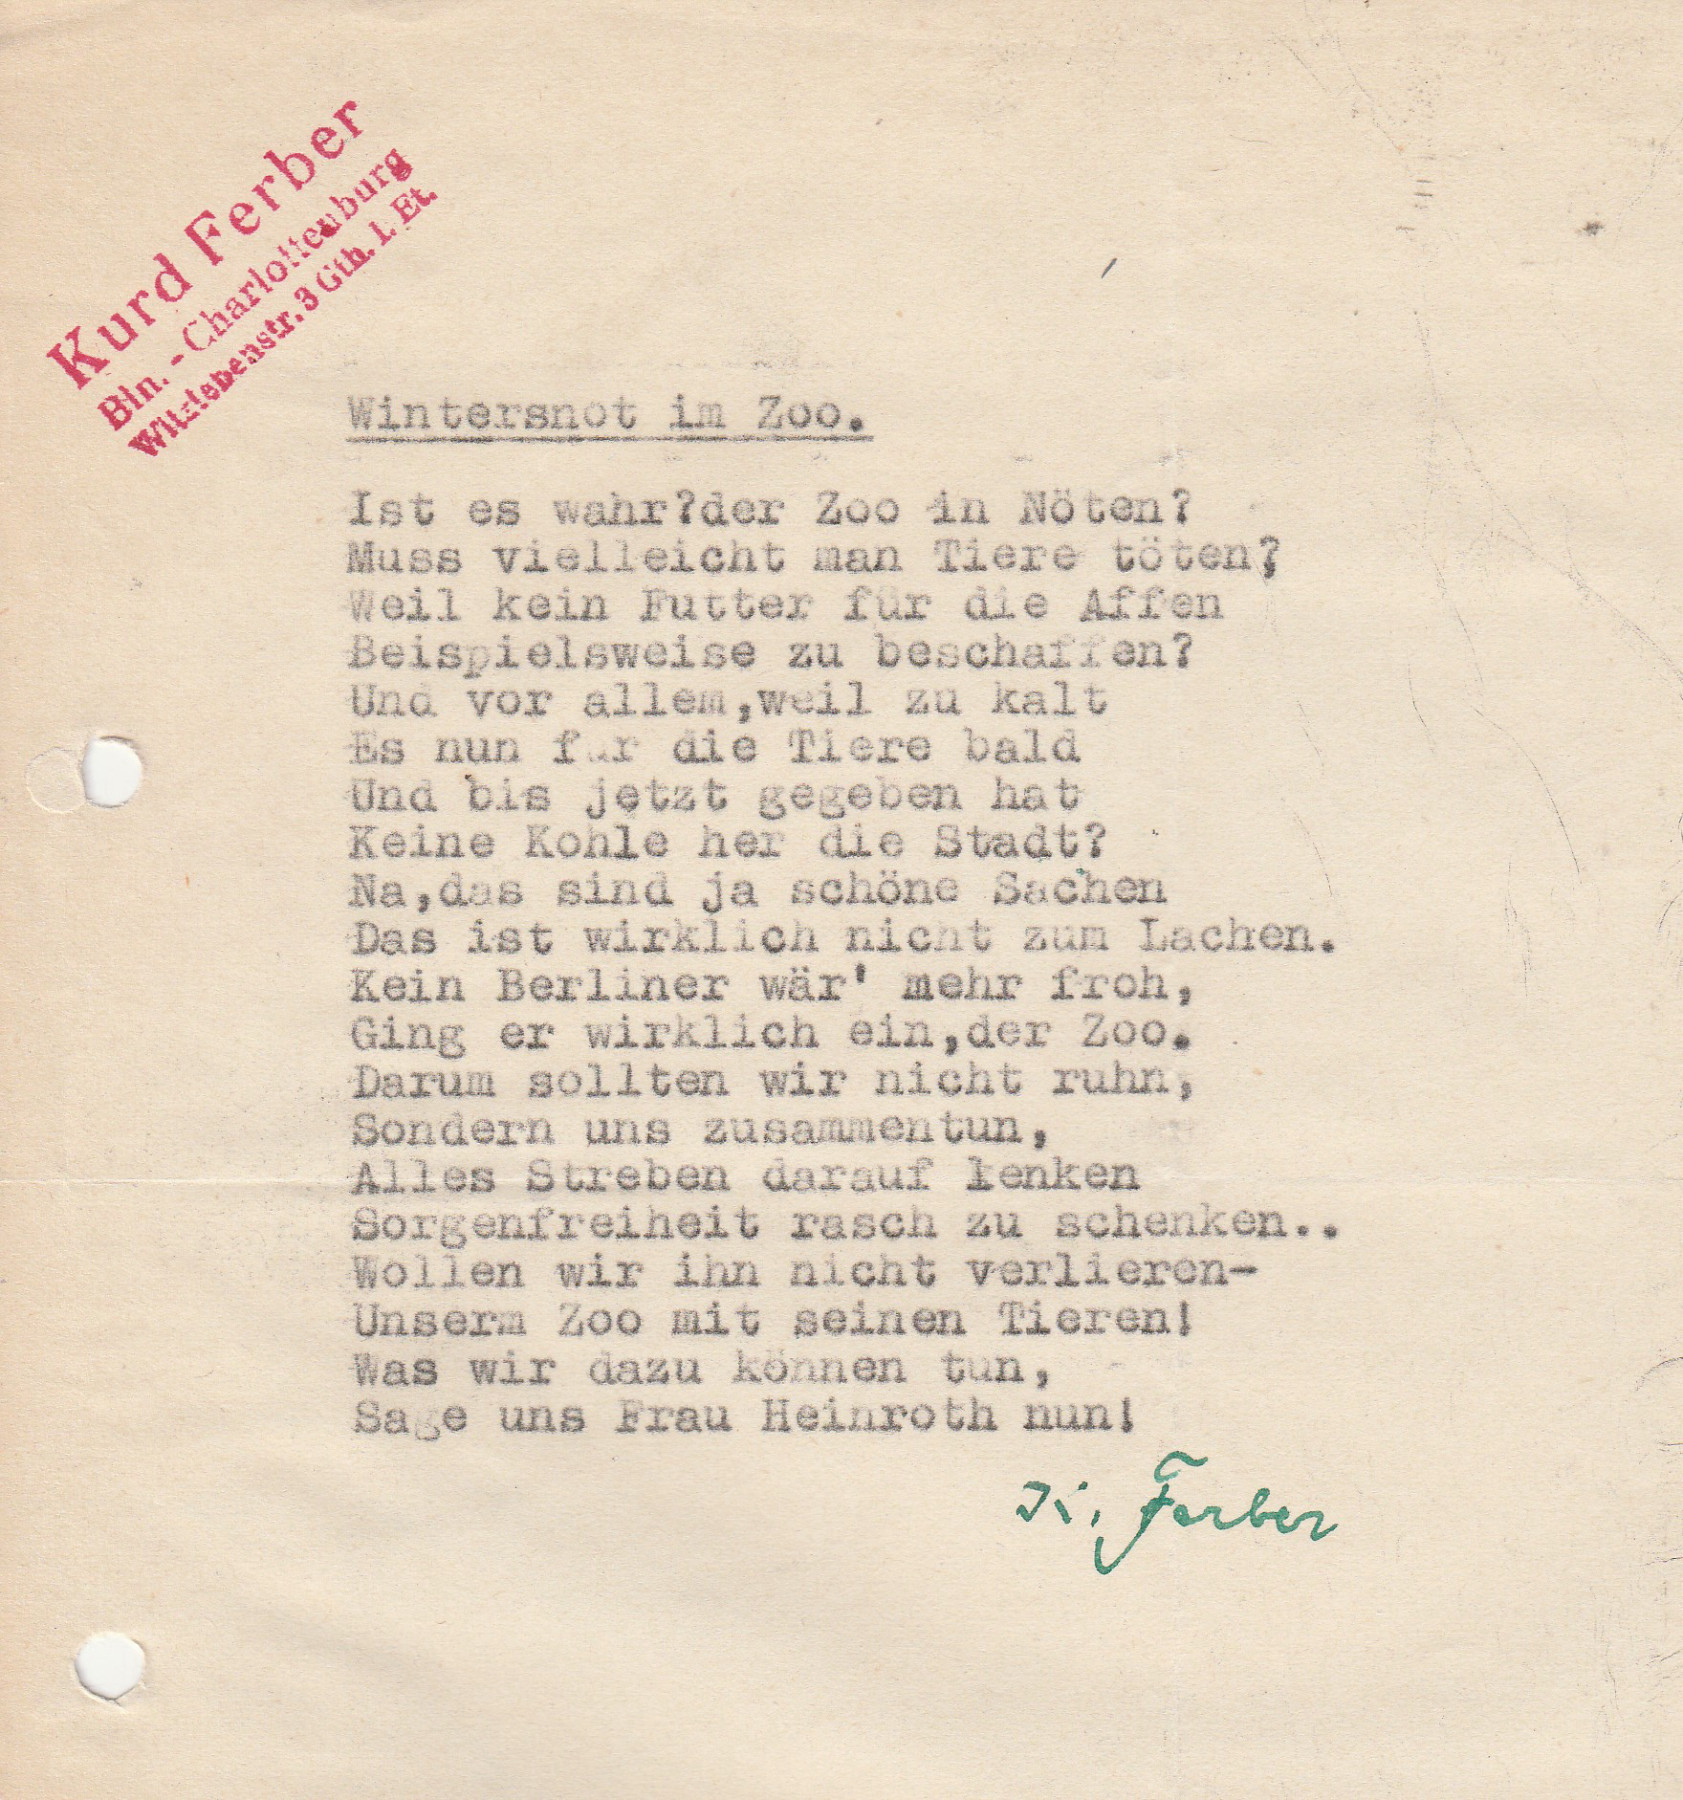 A typewritten poem on a punched piece of paper signed "K. Ferber" with a red "Kurd Ferber" stamp. See transcript below.